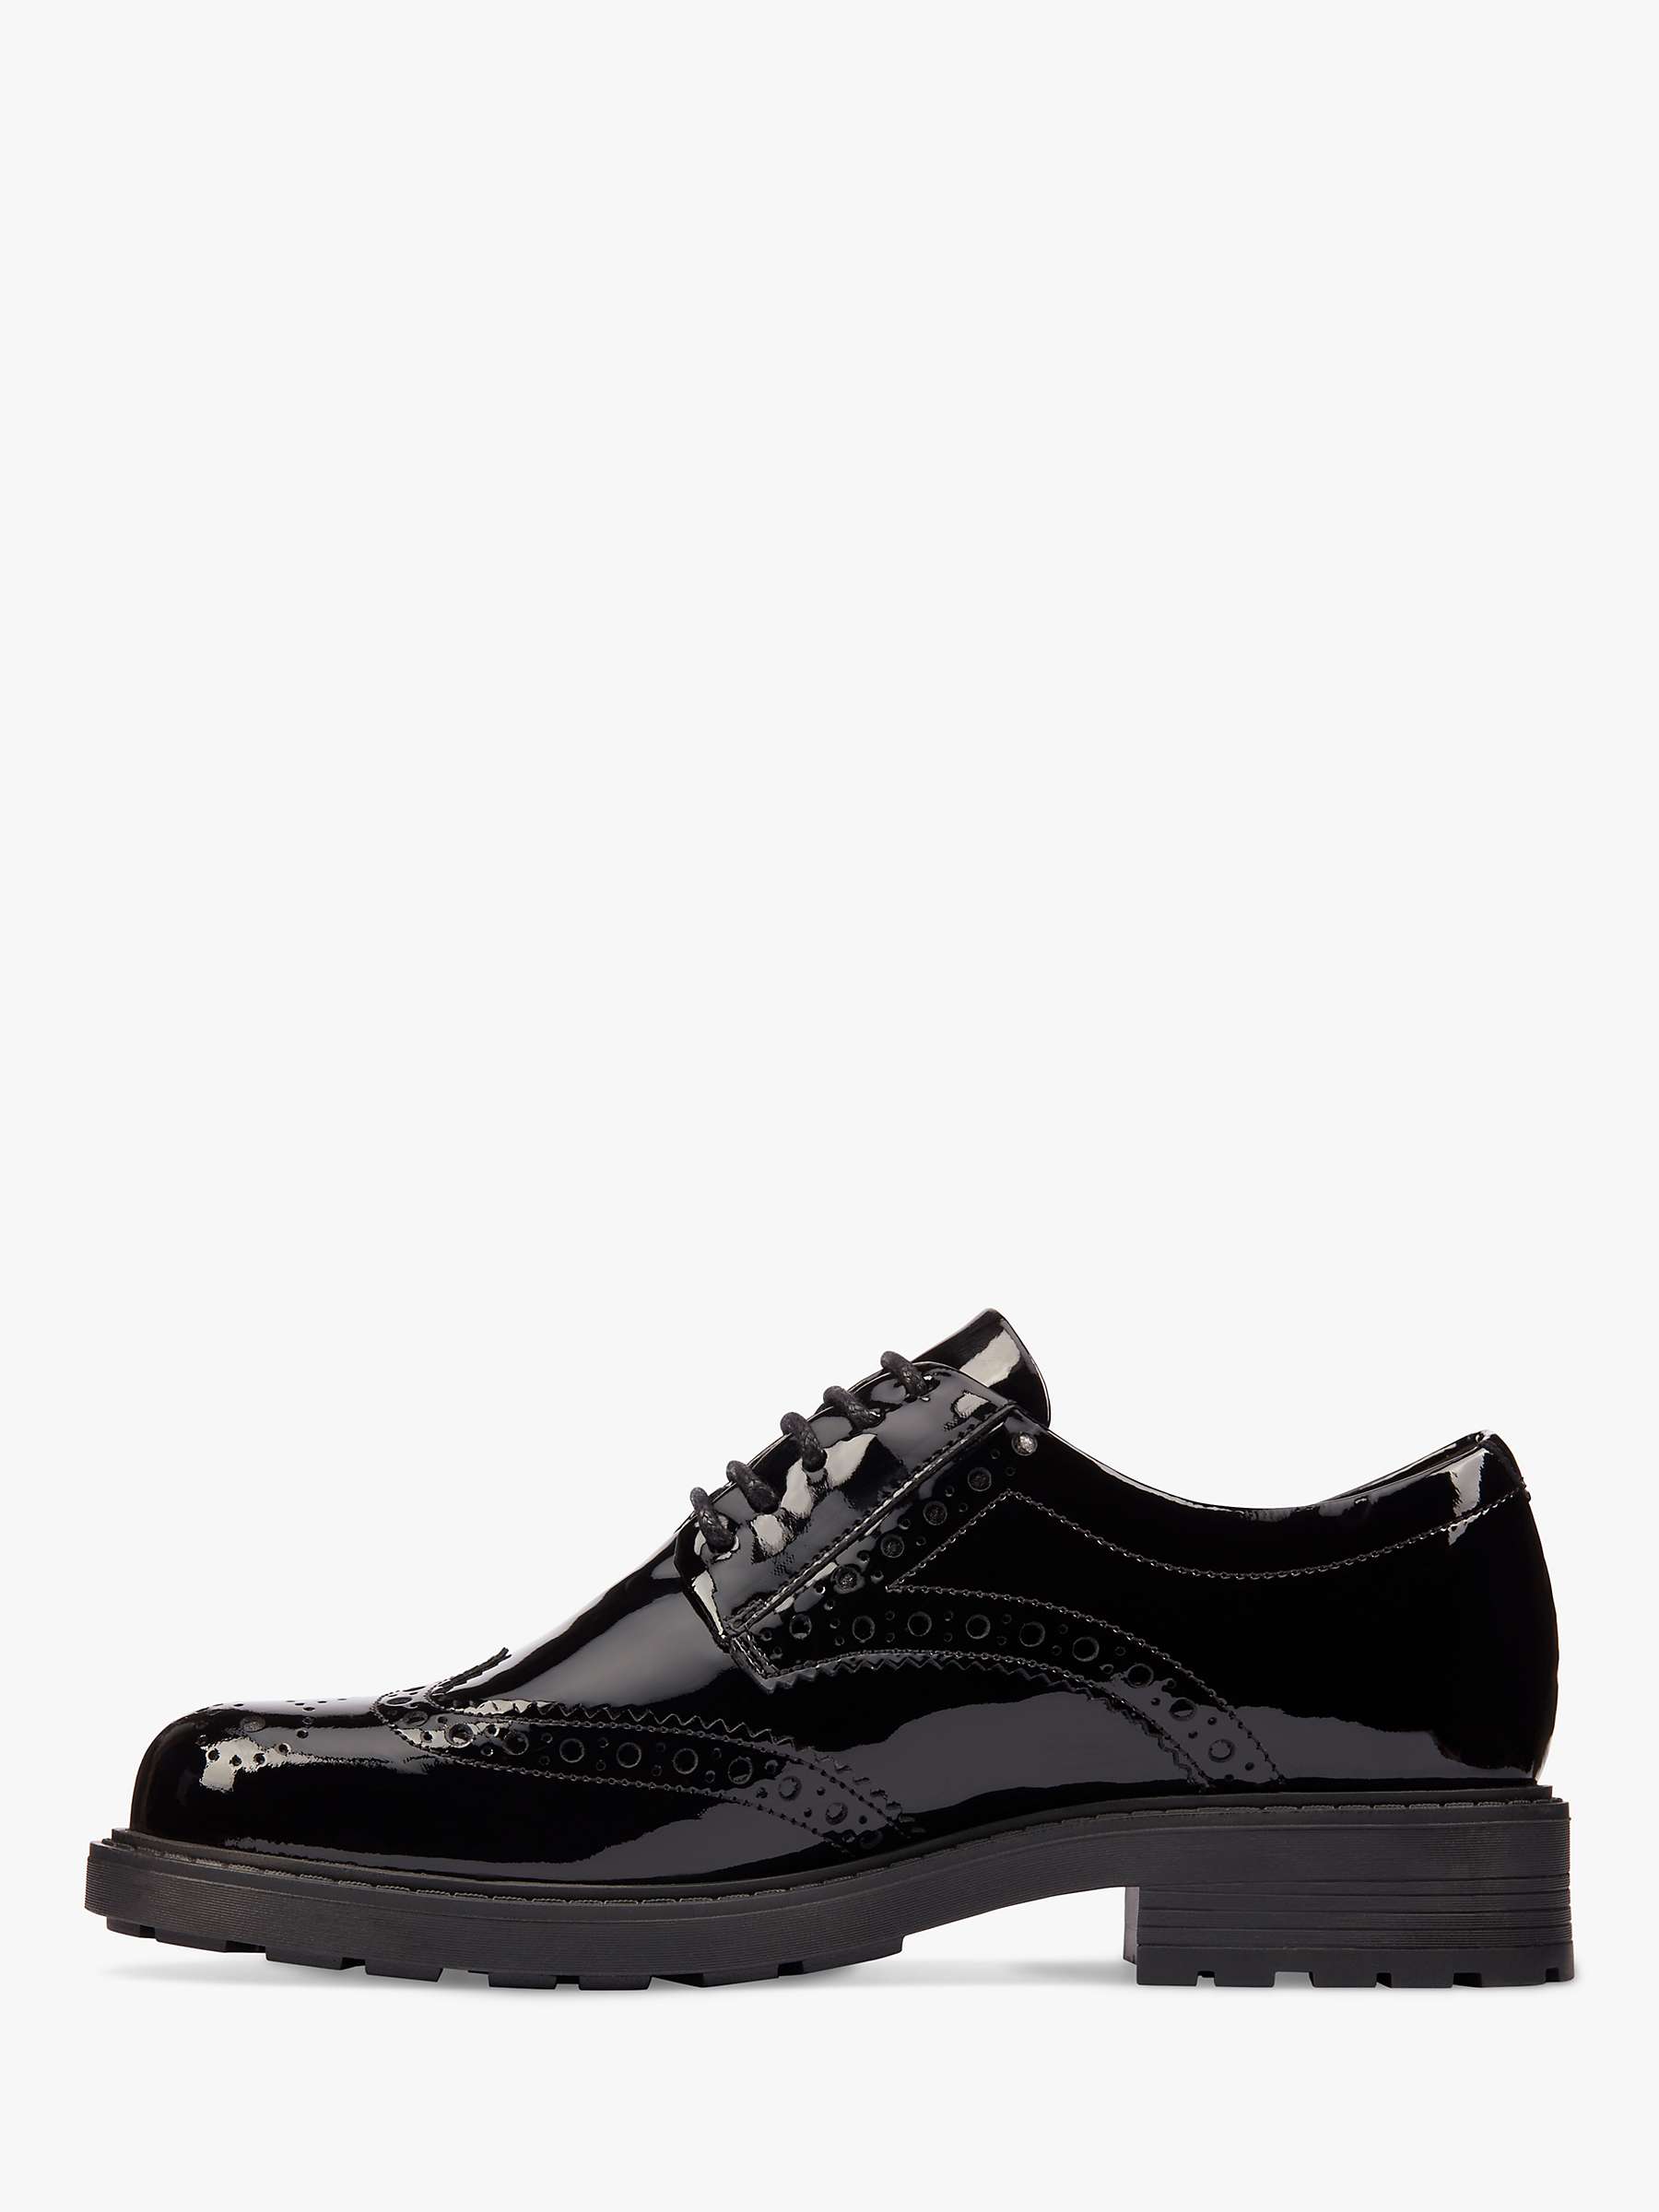 Buy Clarks Orinoco 2 Limit Patent Leather Brogues, Black Online at johnlewis.com